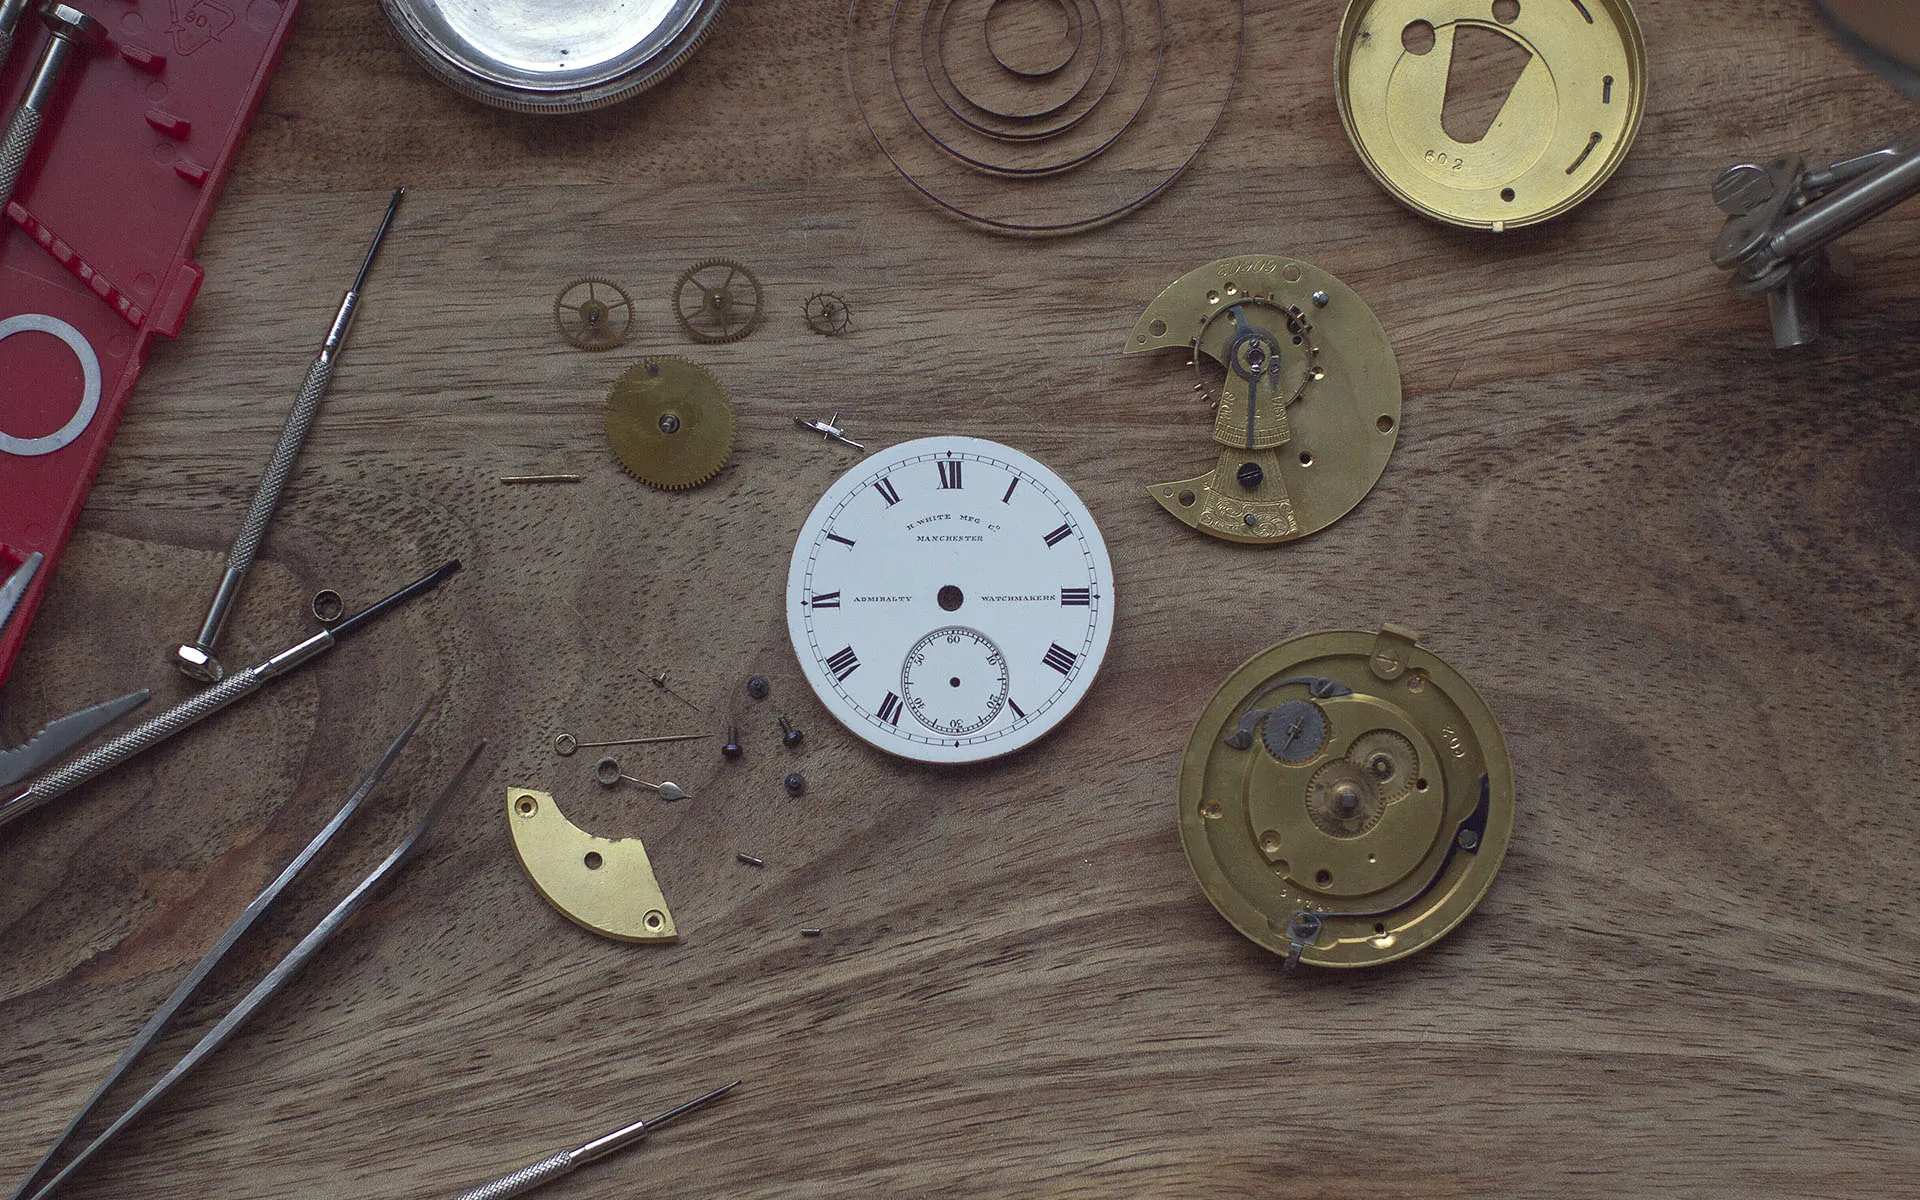 Pieces of a mechanical watch strewn on a wooden bench top.